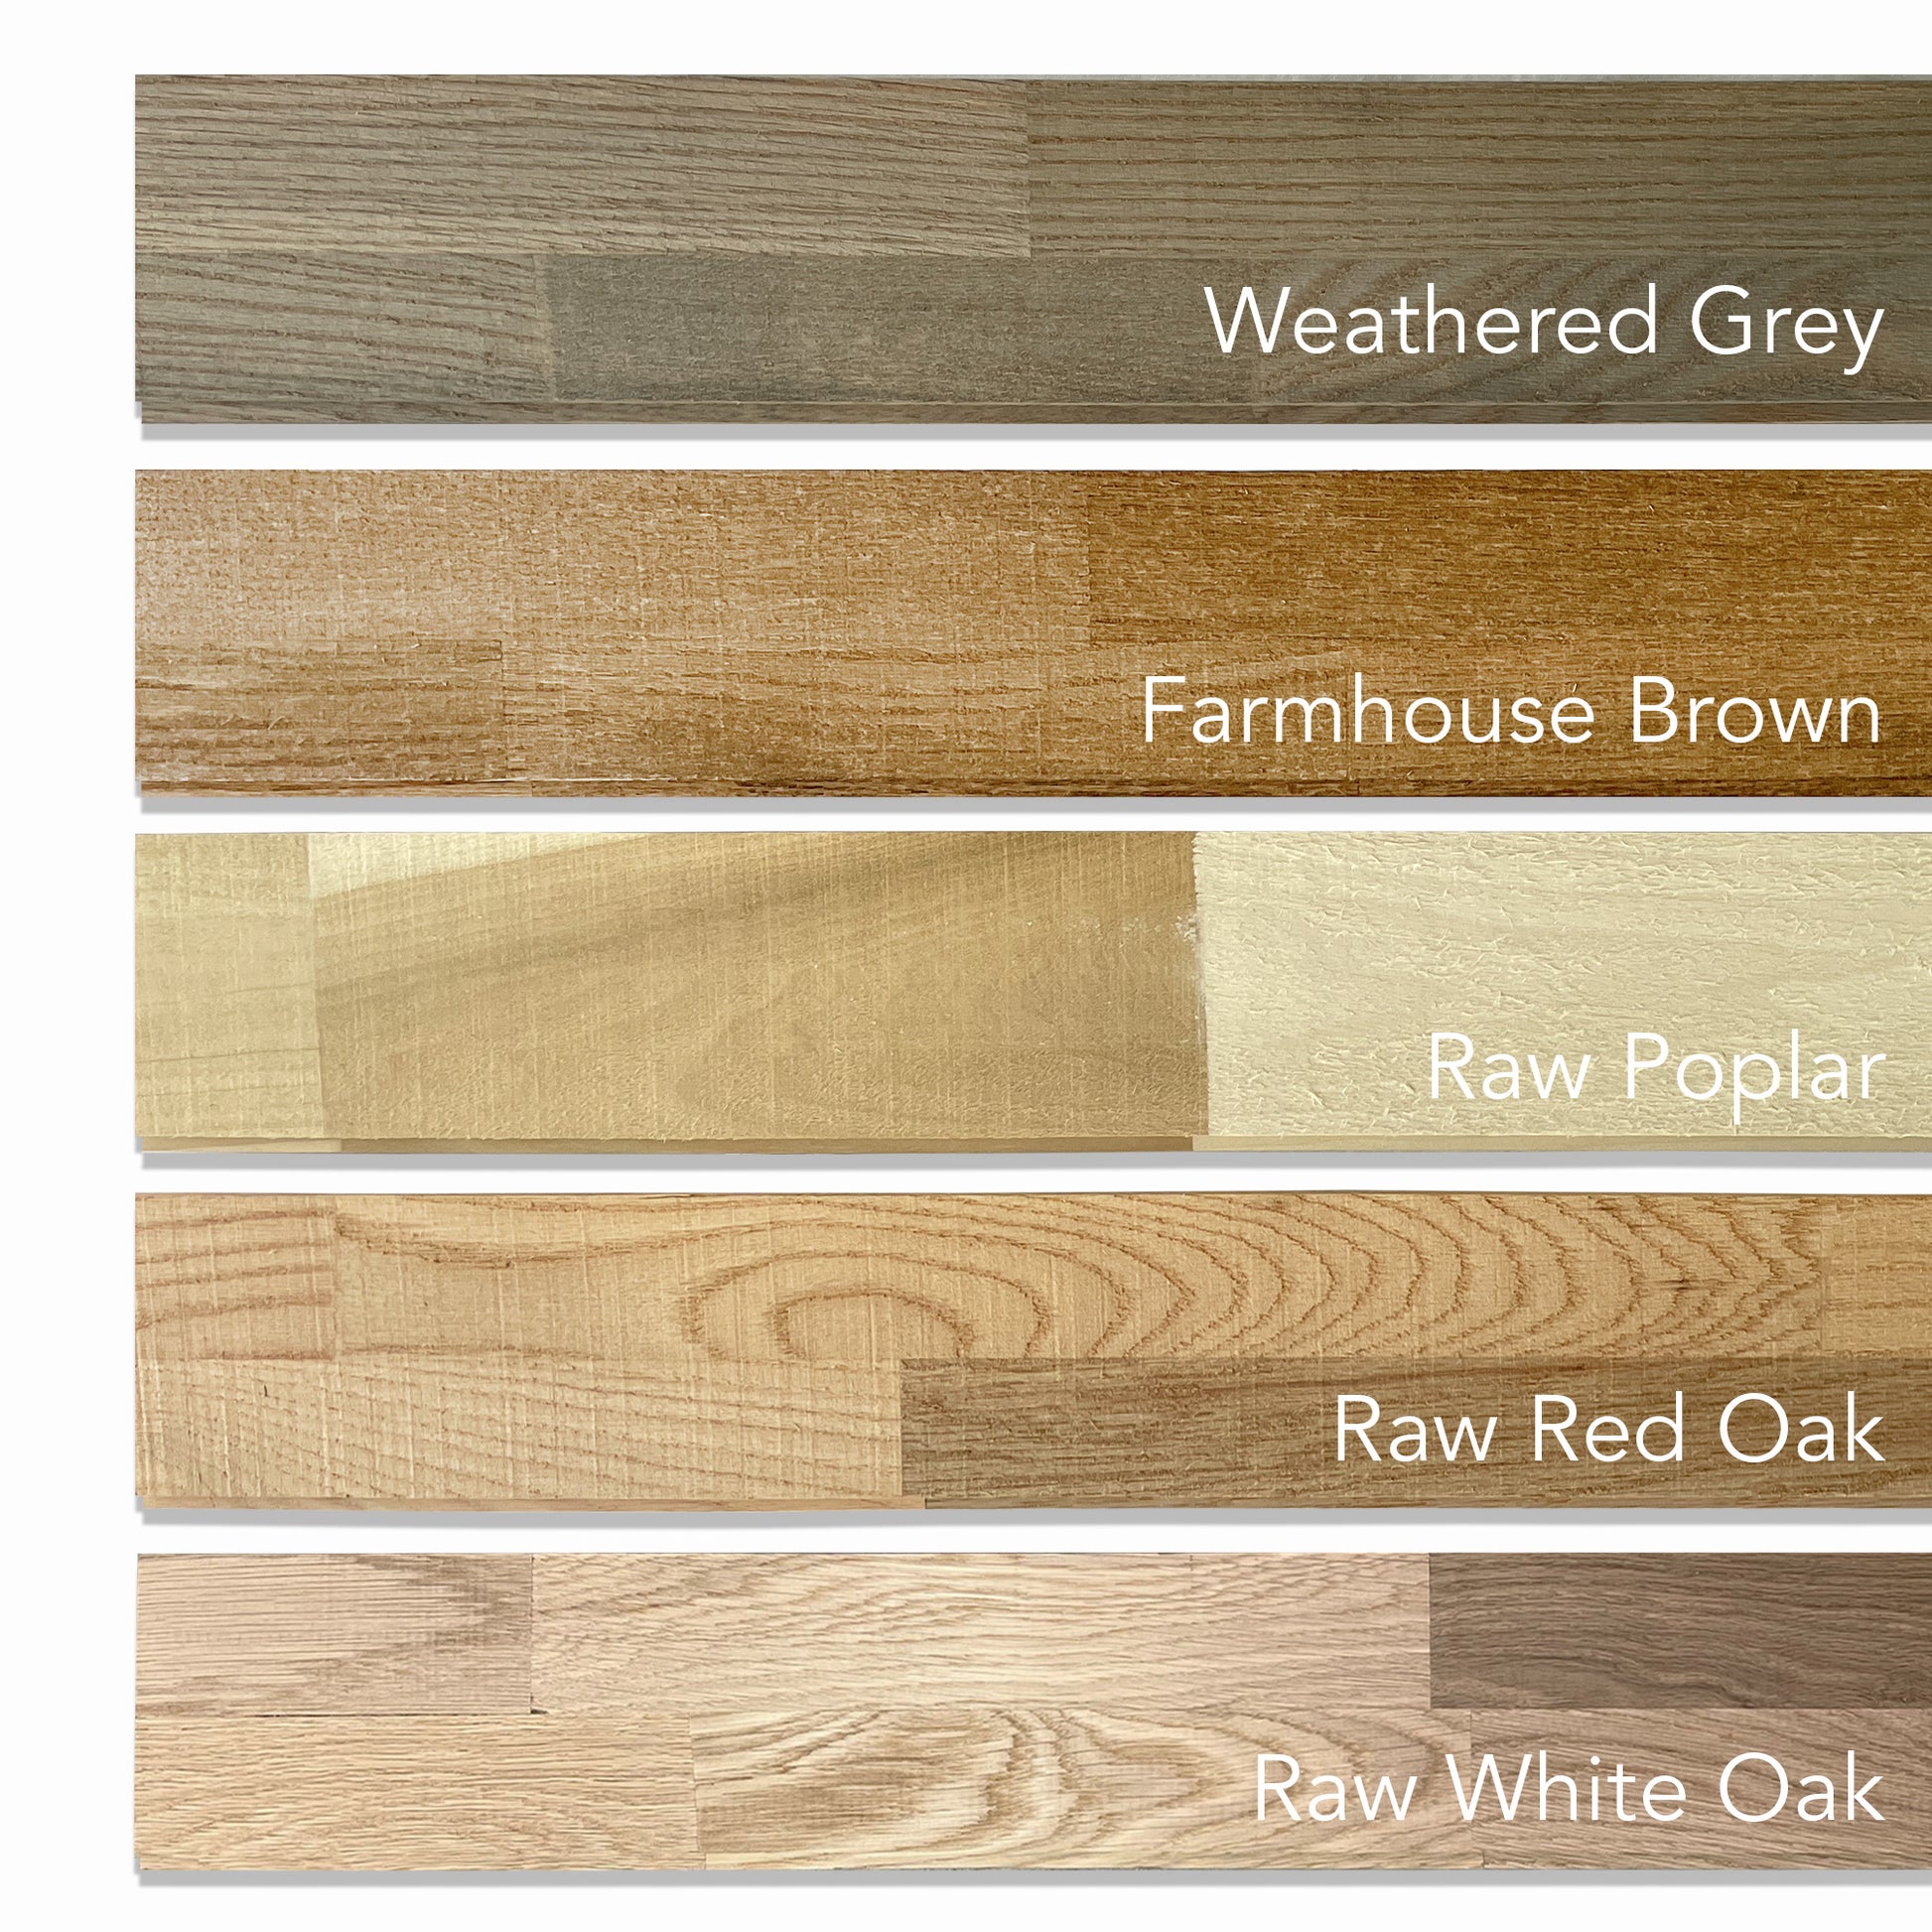 Shiplap Paneling in 4 colors on wood